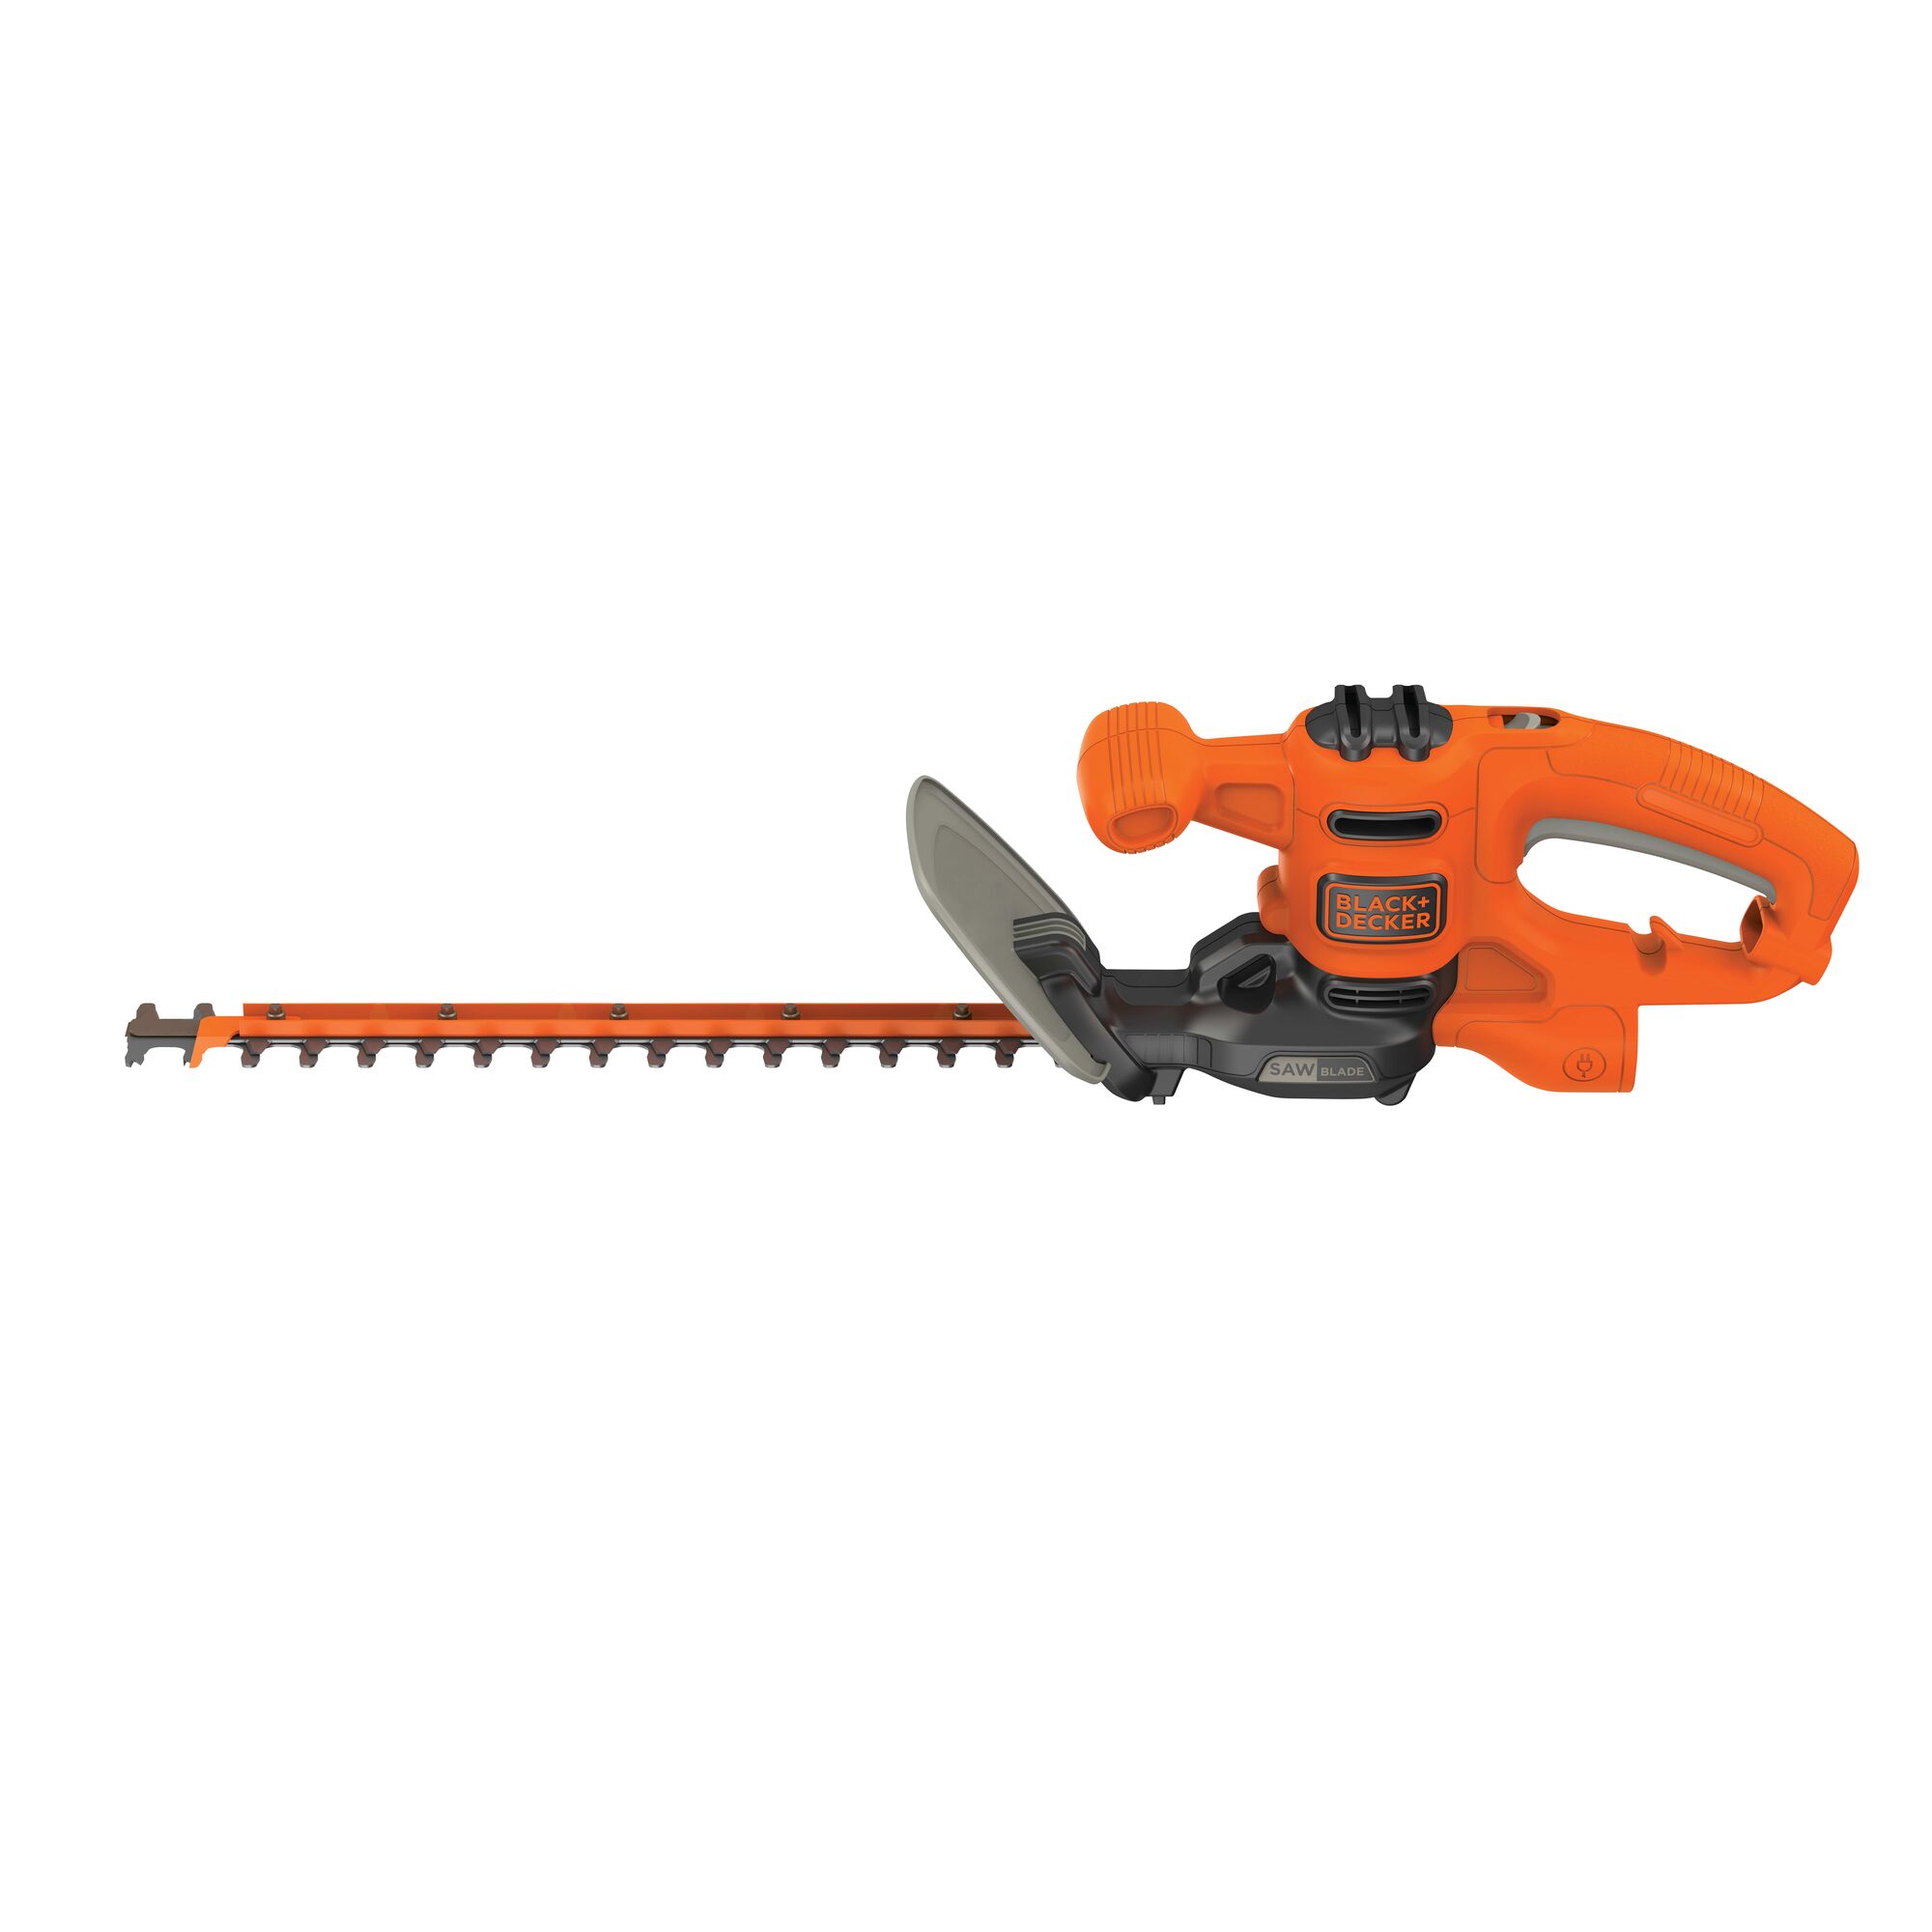 black and decker 16 inch SAWBLADE electric hedge trimmer